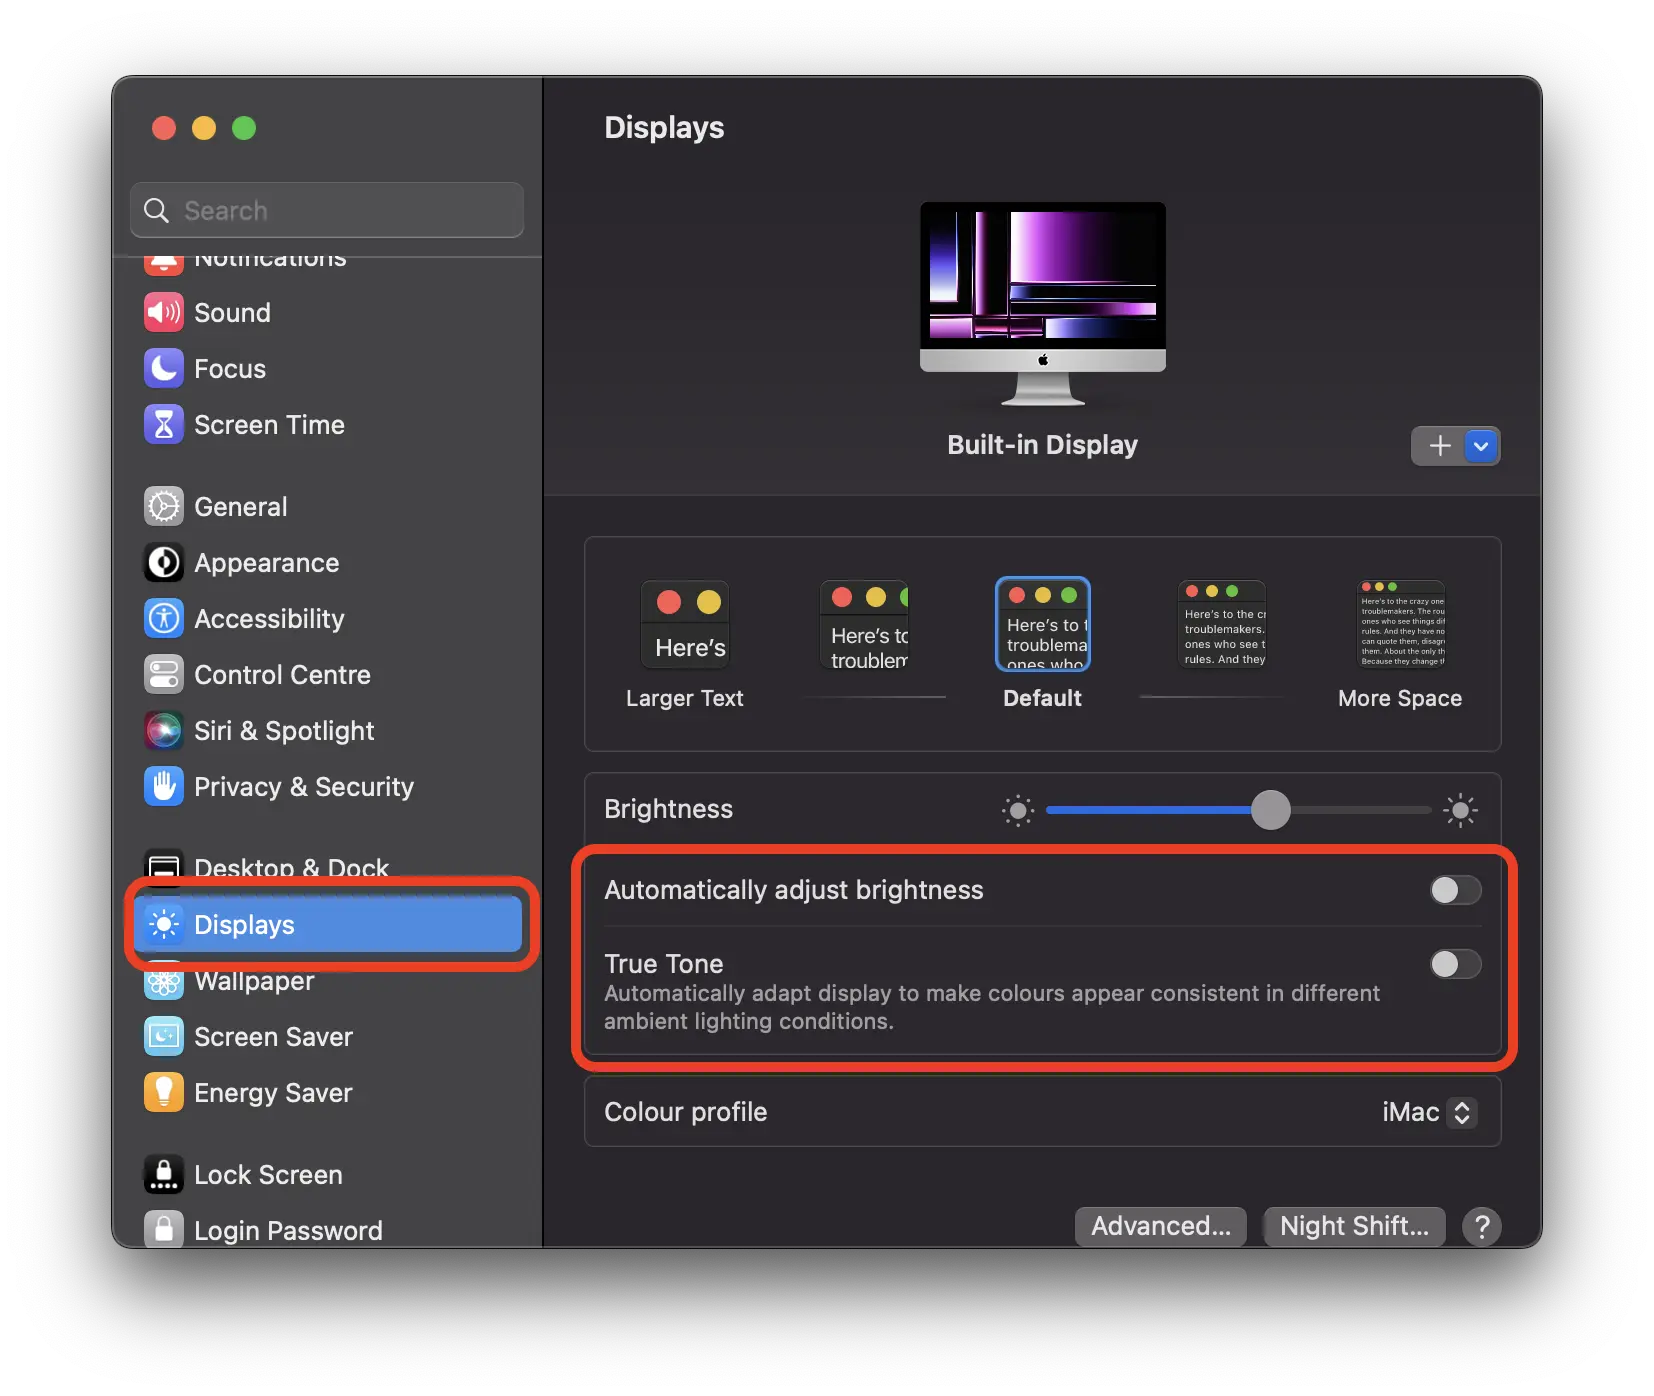 How to disable automatic brightness and color change on Mac